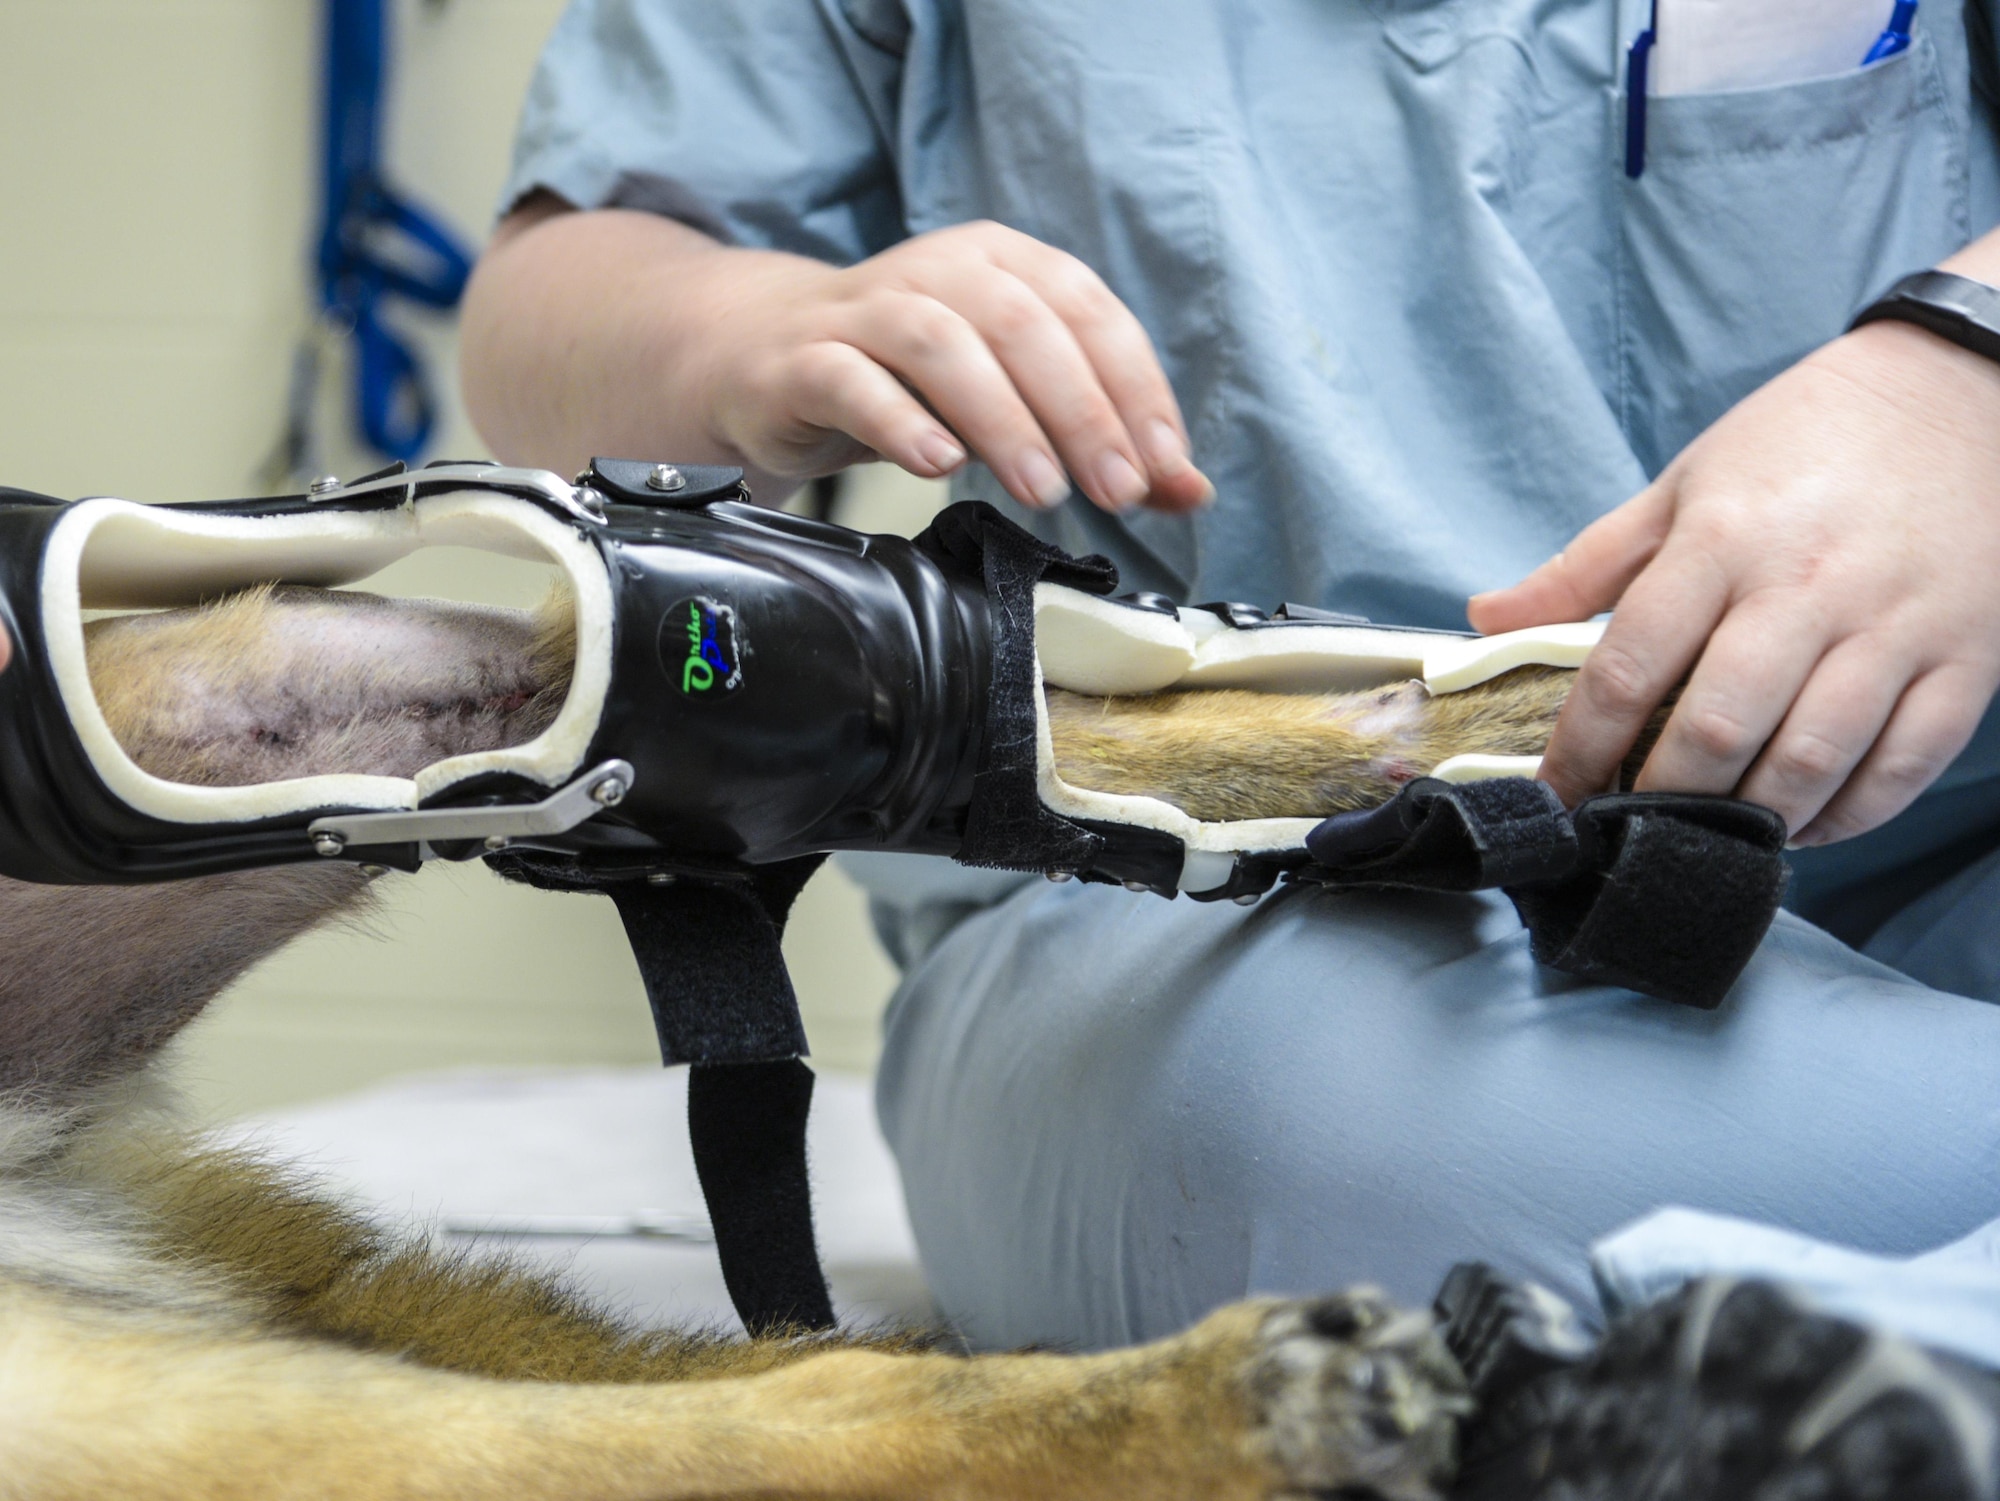 Military Working Dog SStash gets outfitted with his new modified leg brace at the Holland Military Working Dog Hospital on Joint Base San Antonio-Lackland, Texas, April 2, 2015. SStash became injured and inactivity led to severe muscle loss in his leg; the original leg brace could no longer fit properly. (U.S. Air Force photo by Staff Sgt. Michael Ellis)